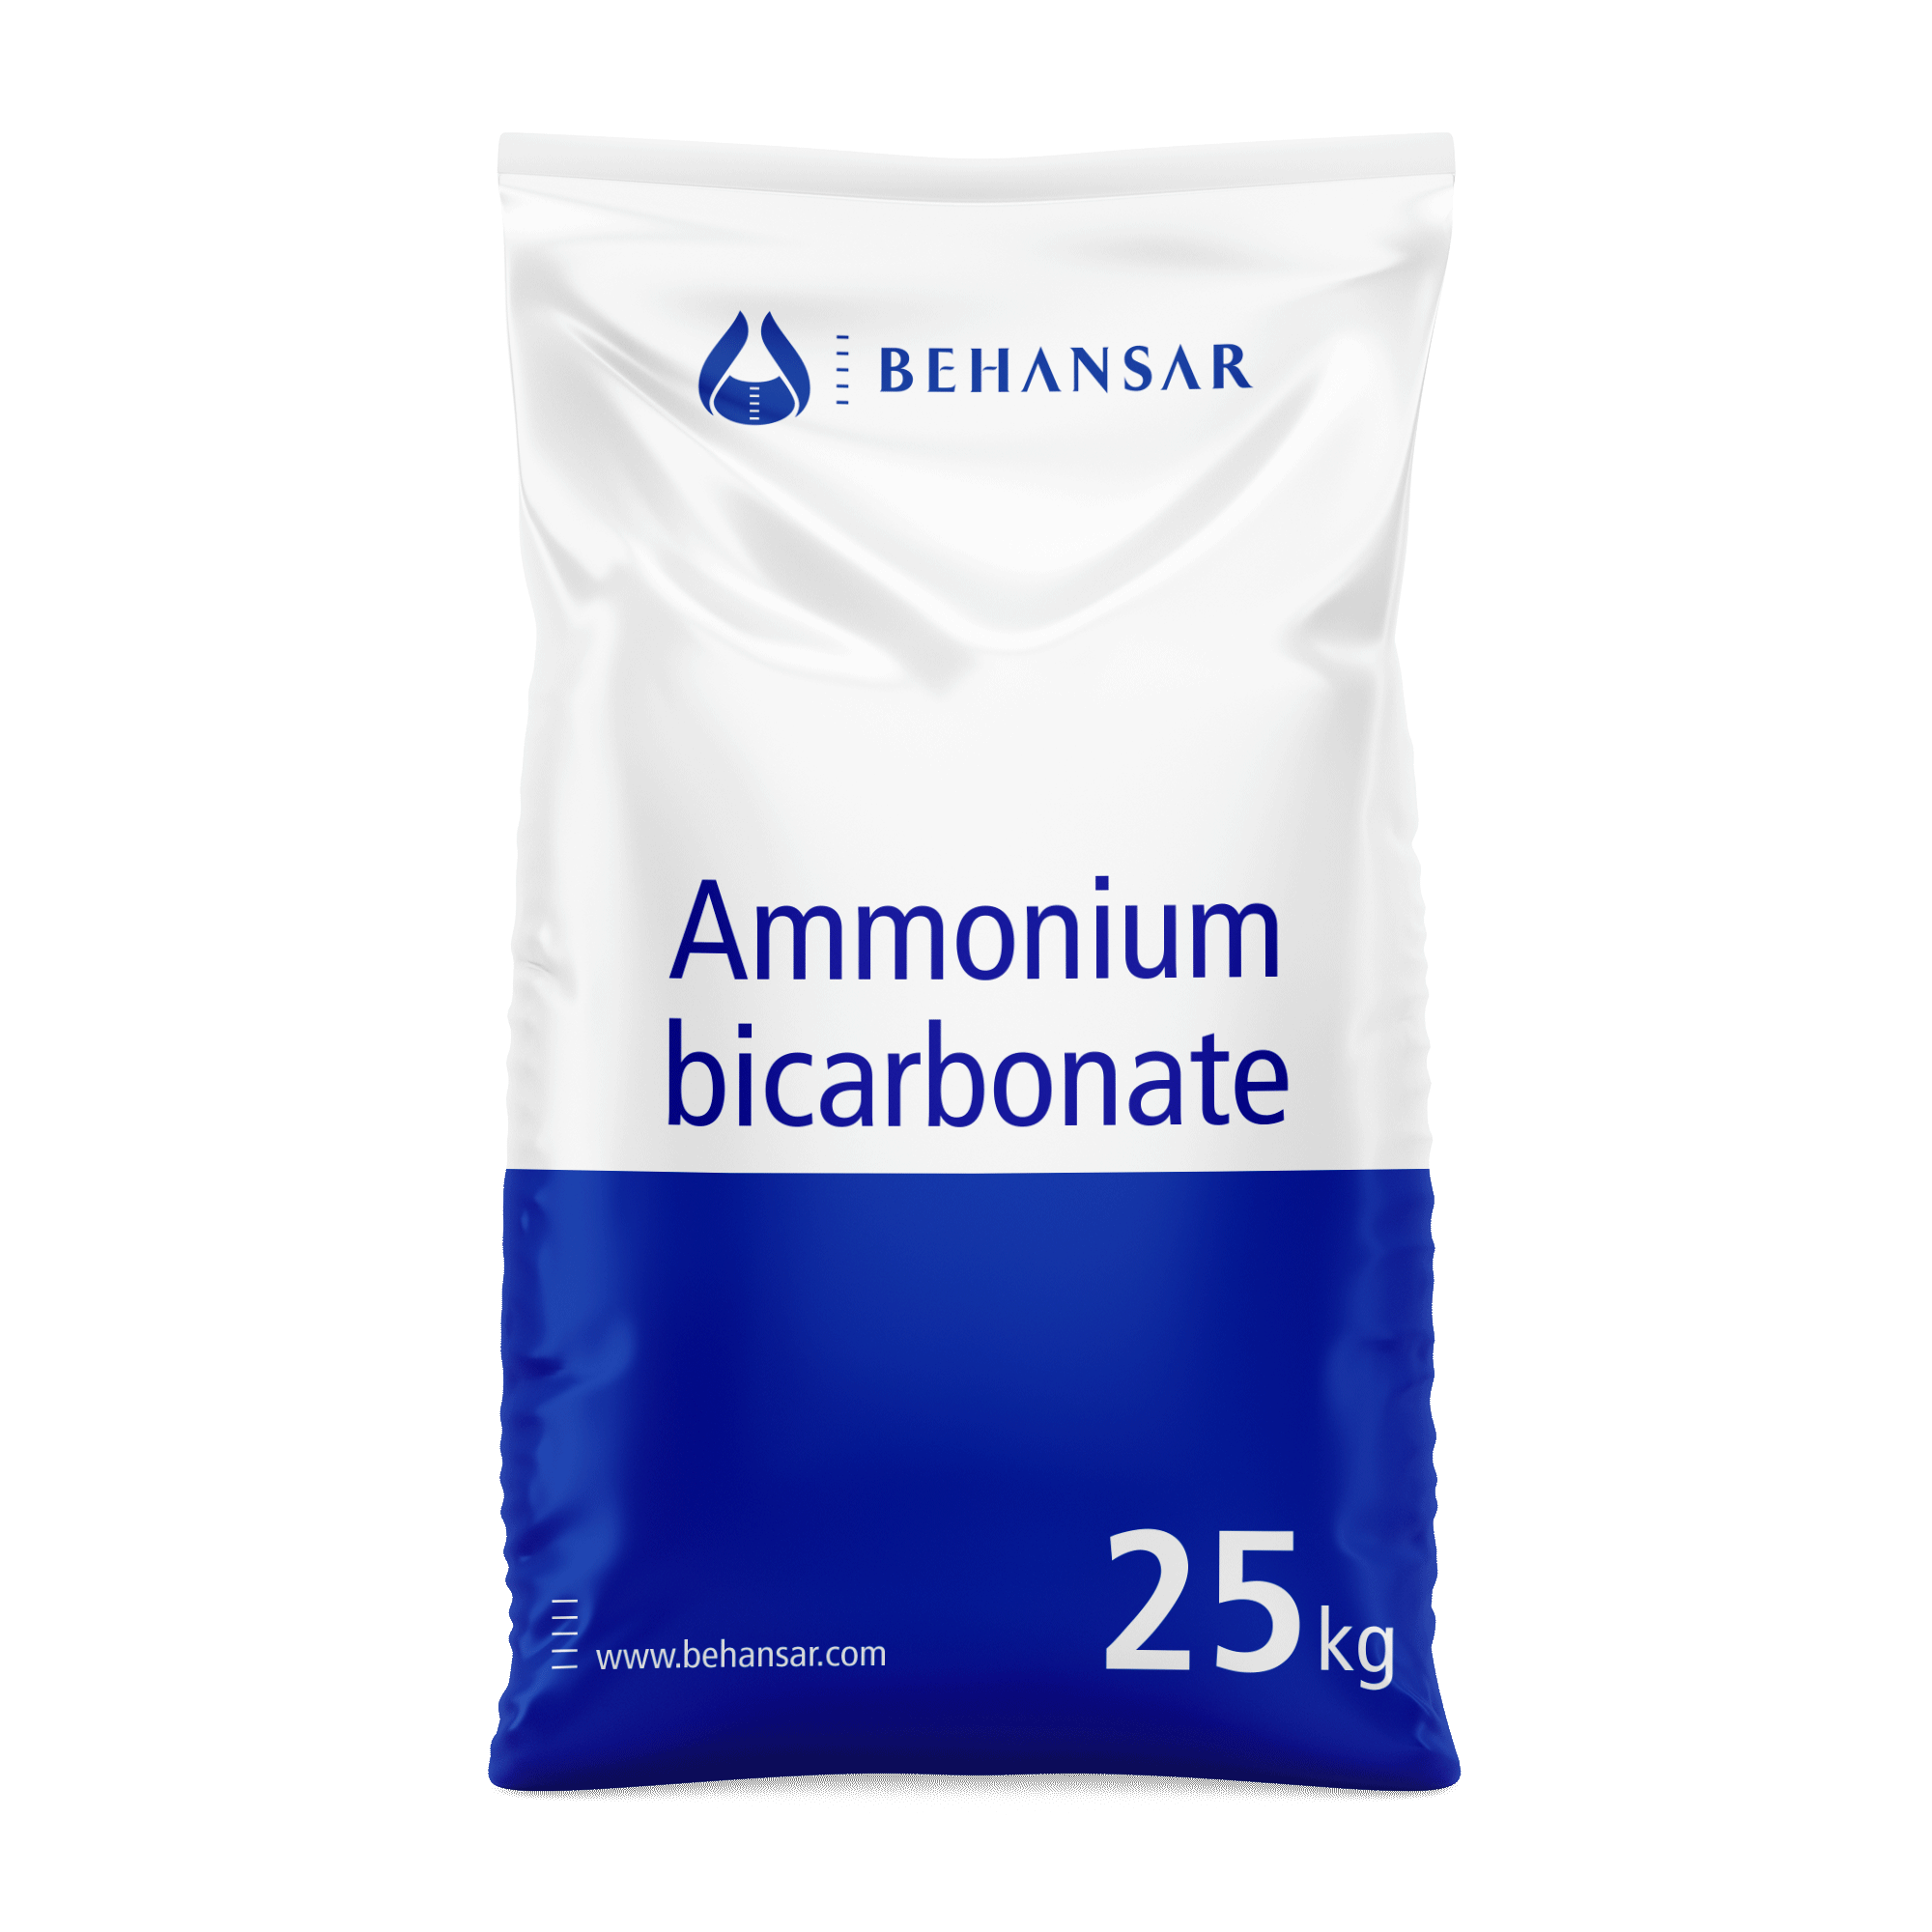 Ammonium bicarbonate is one of the products of Behansar Co